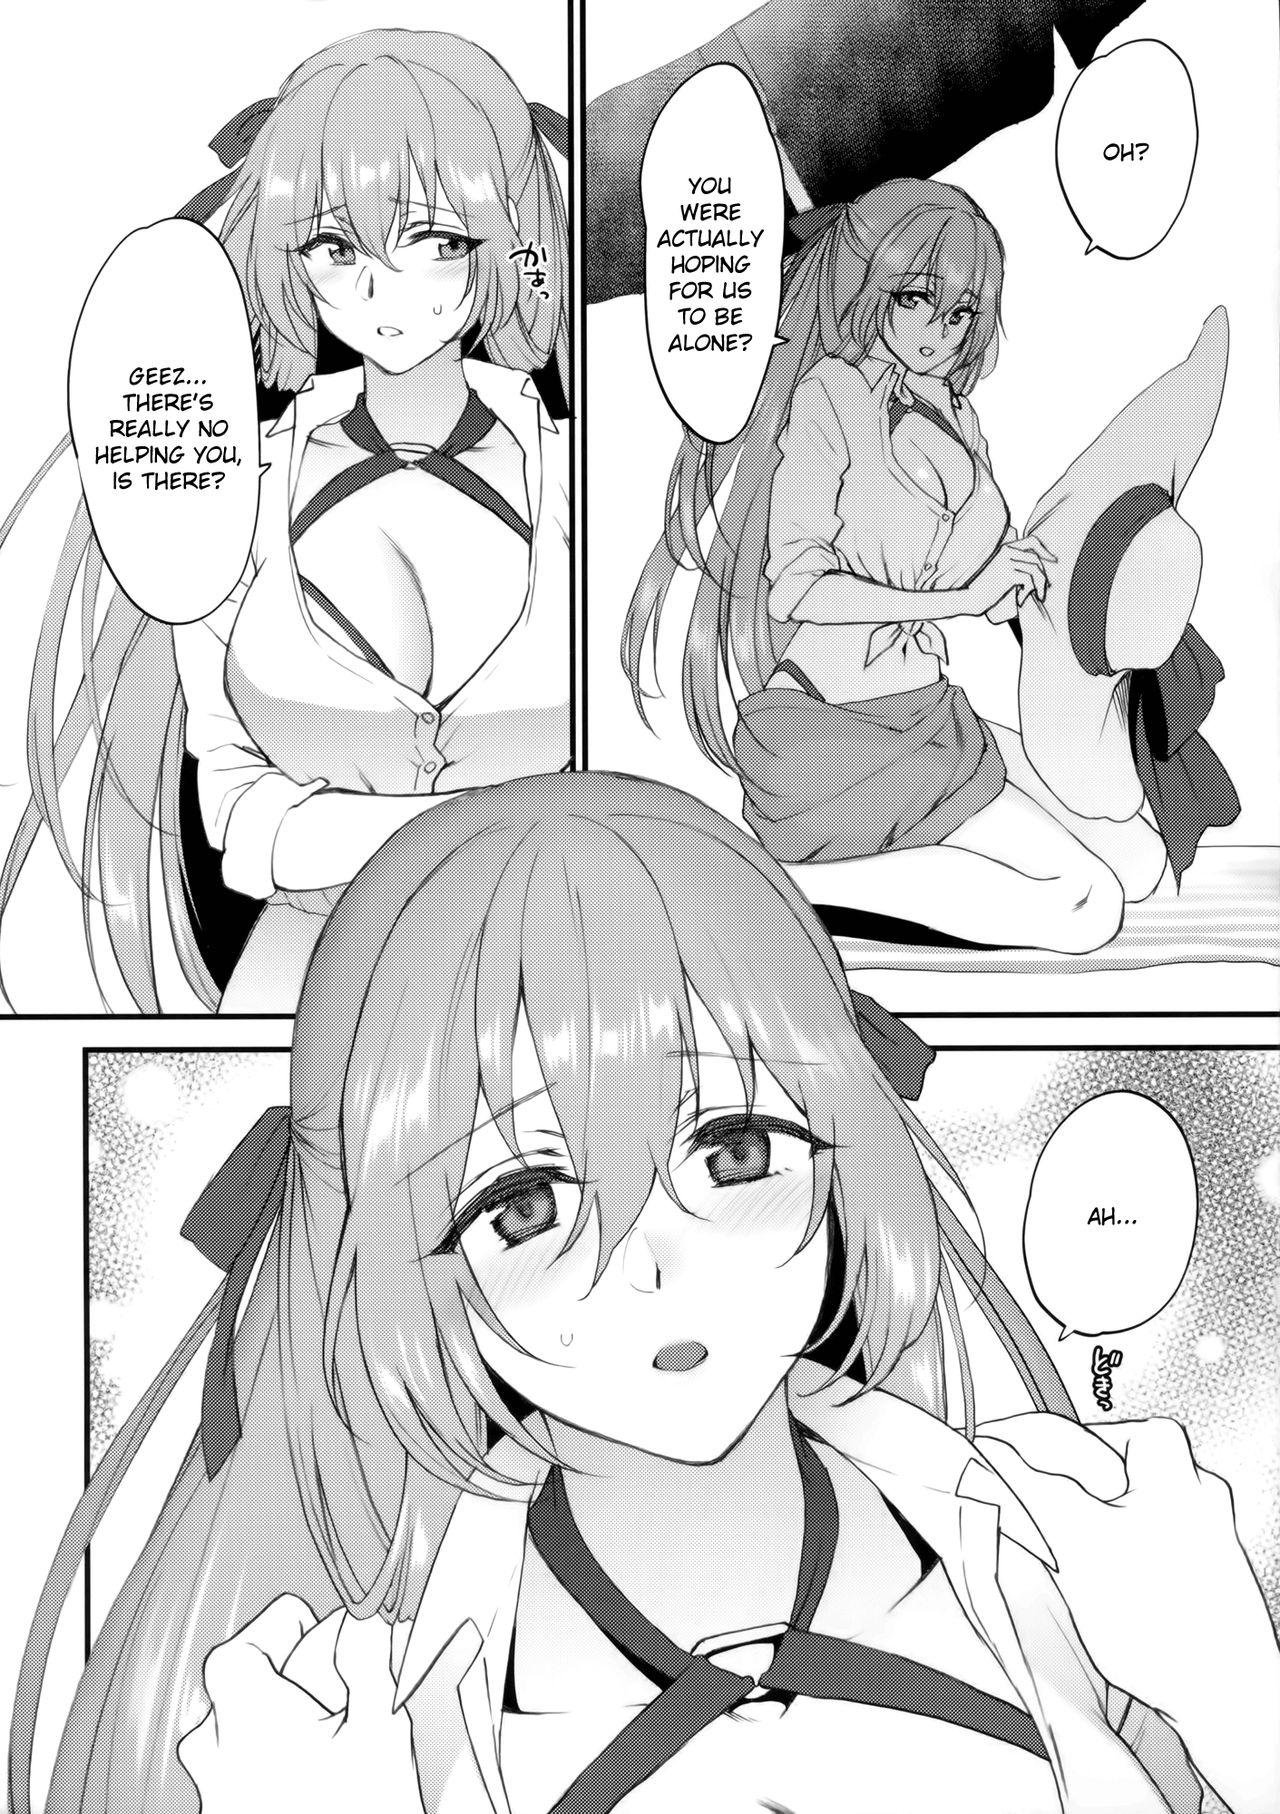 Ano Summer Escape - Girls frontline Denmark - Page 5